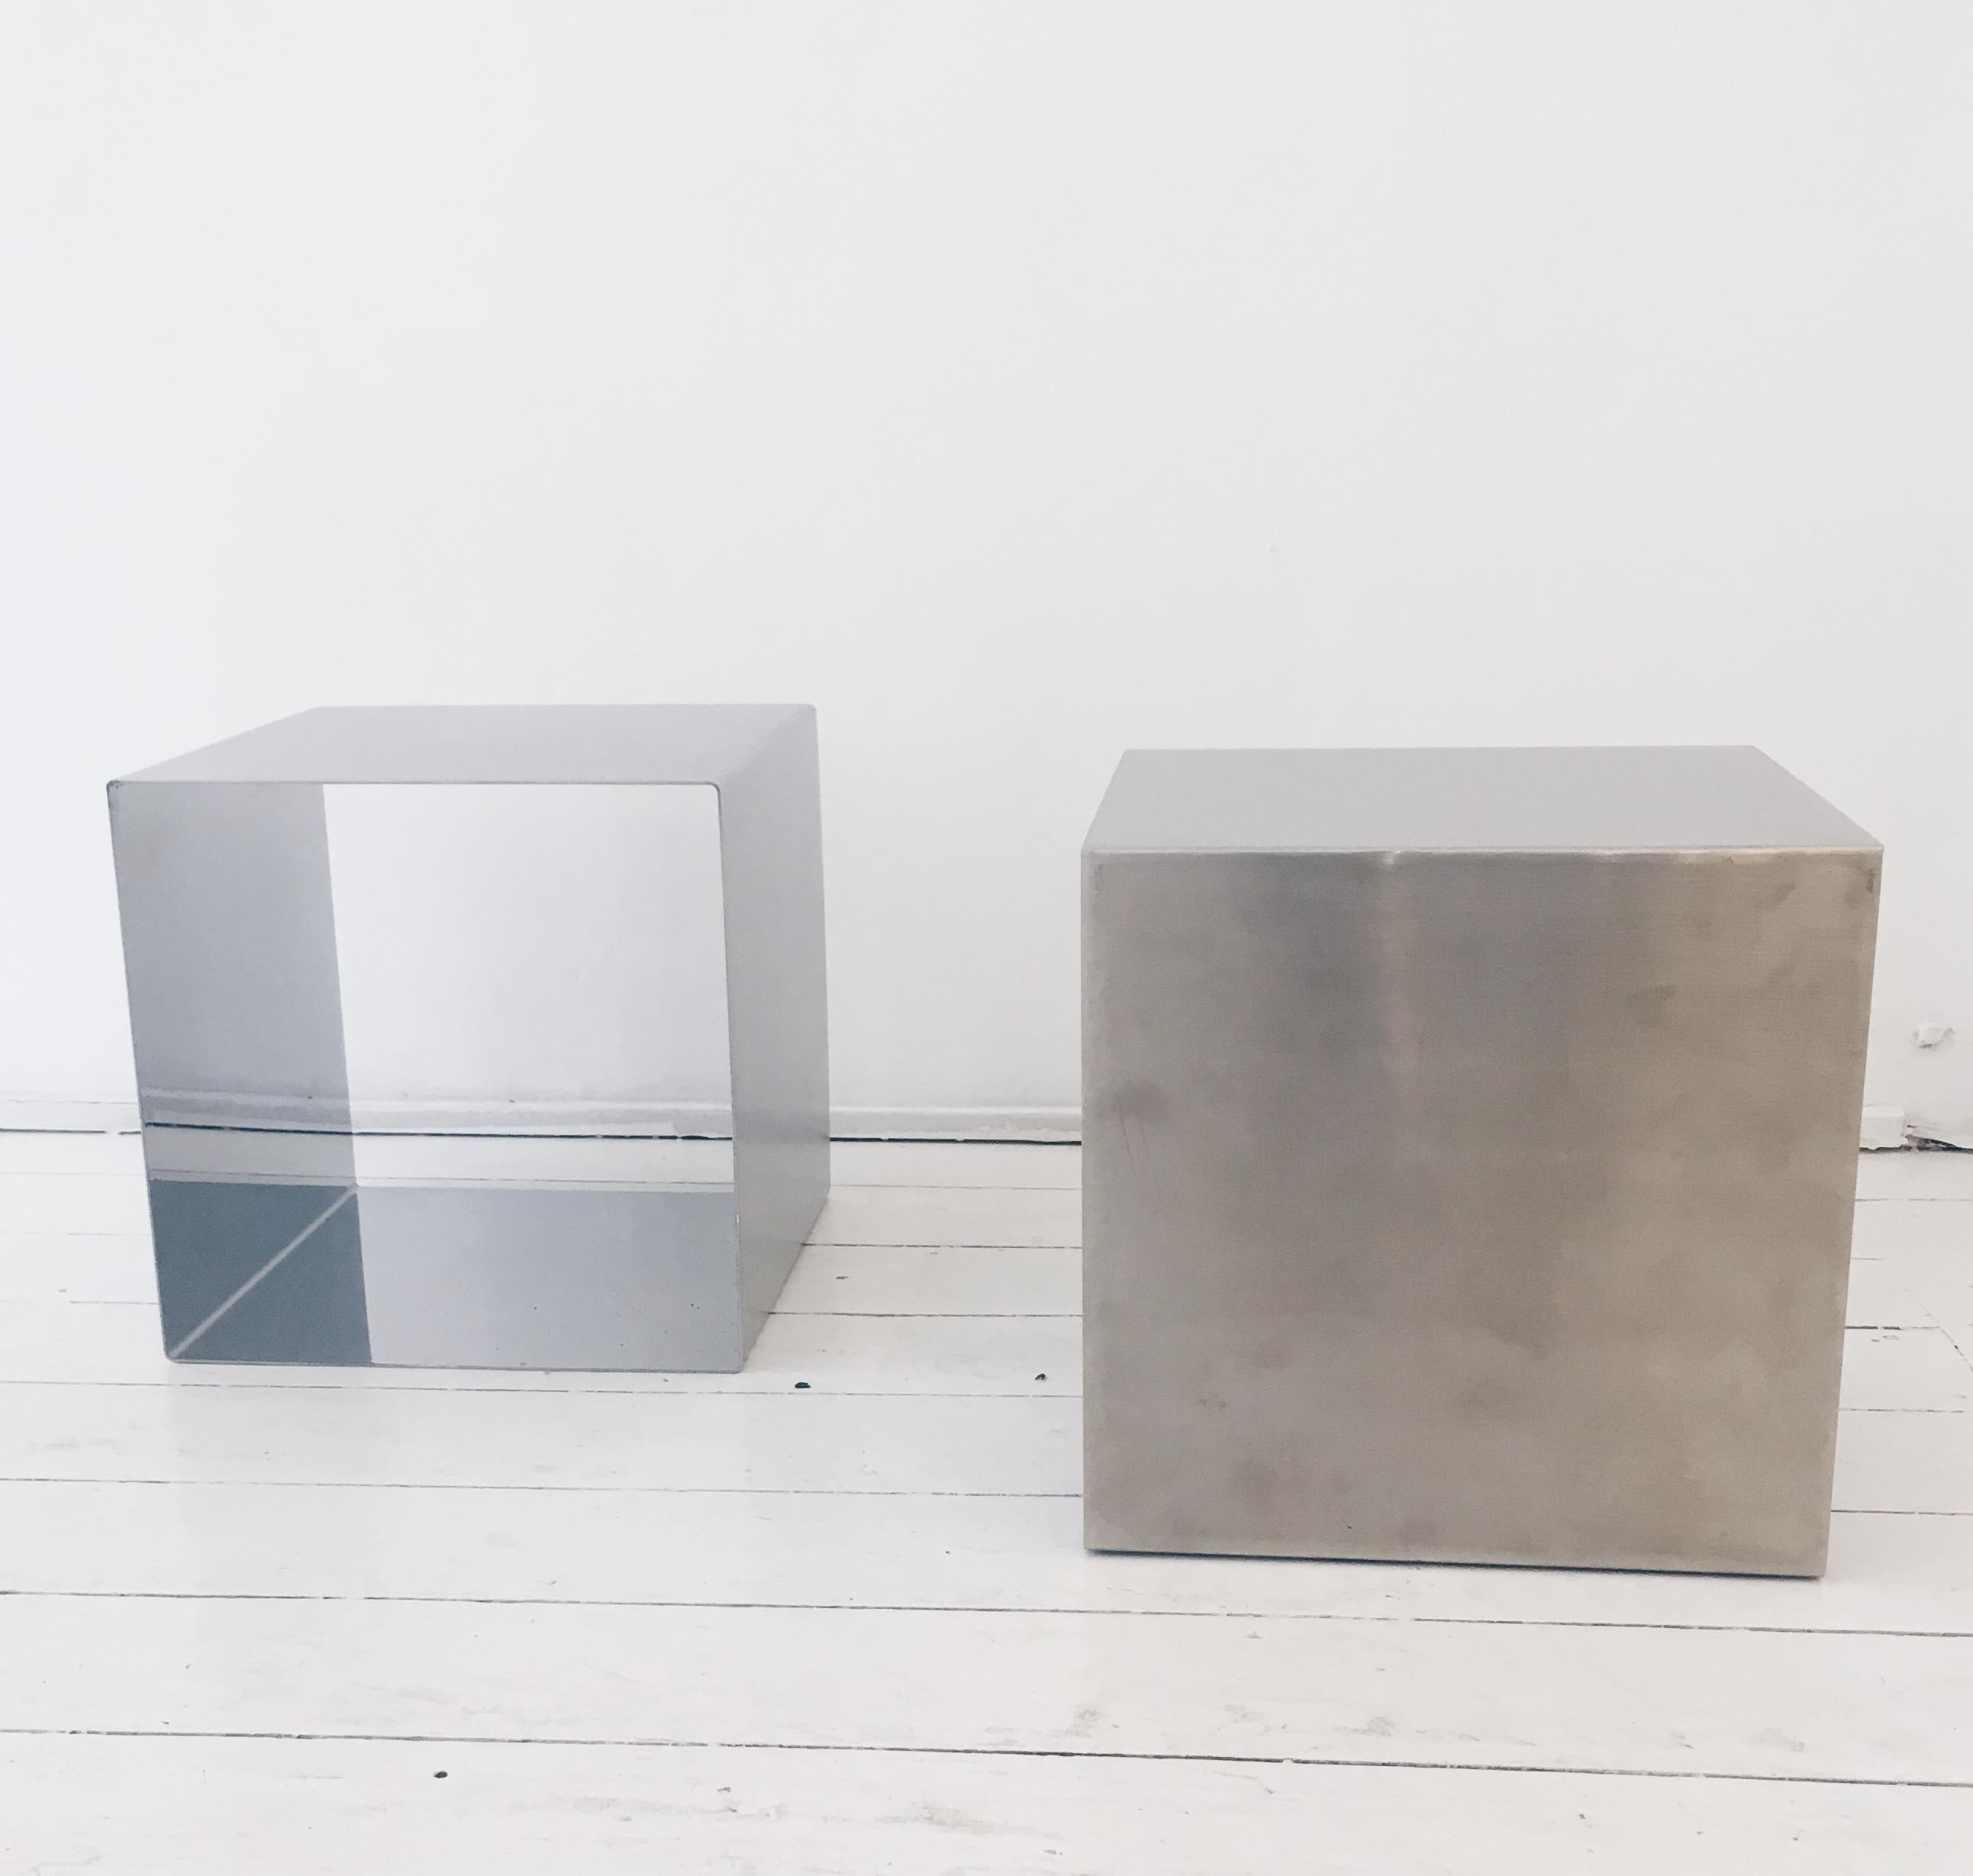 Pair of cube model coffee tables by Maria Pergay from the 1960s. In polished stainless steel and brushed stainless steel on the outside. Accompanied by their original signed certificate. Good condition with some scratches. Price for the pair